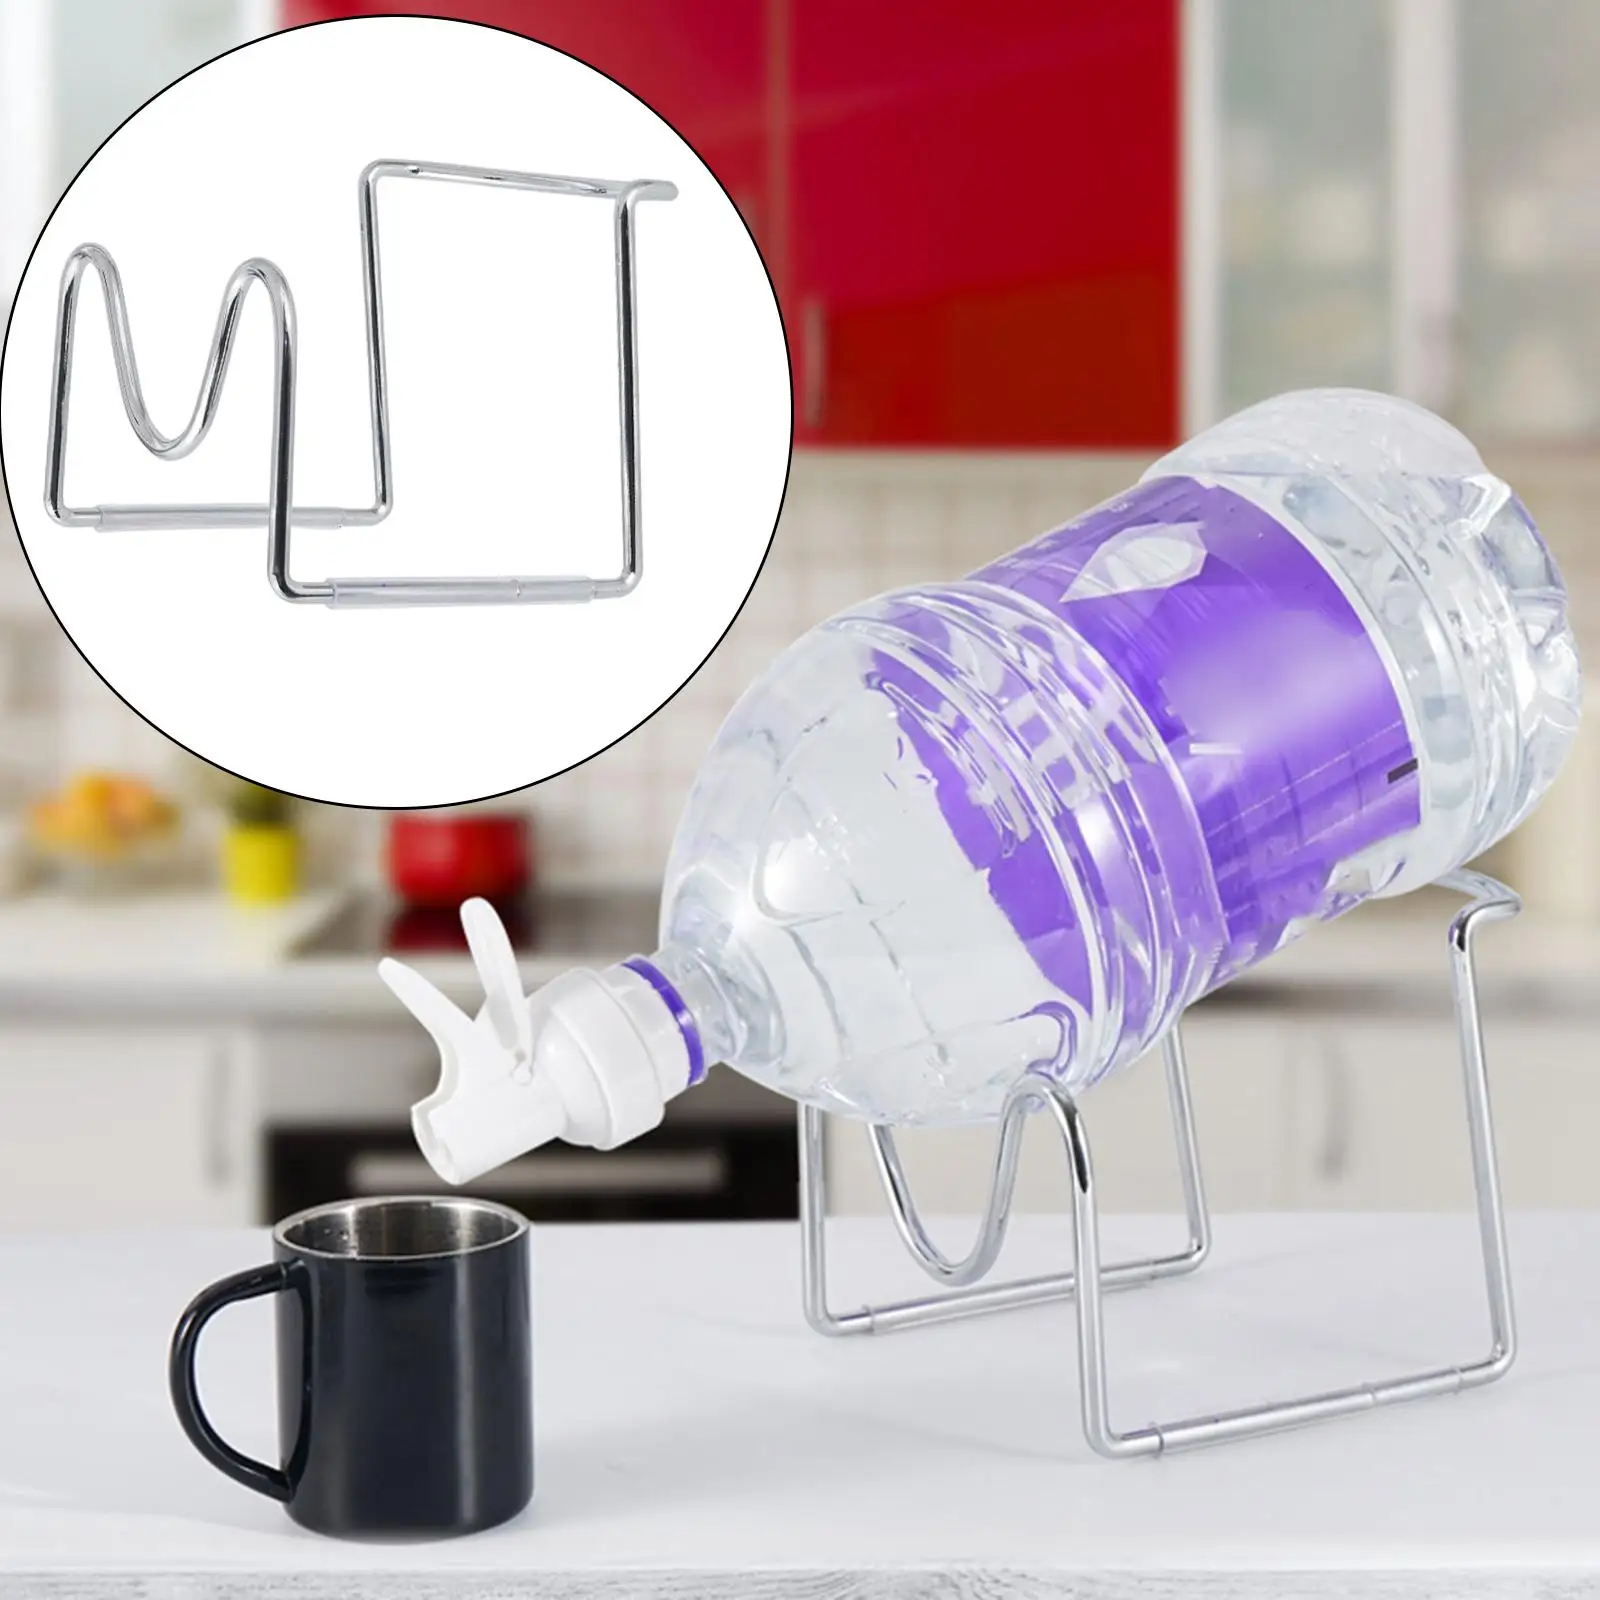 5L Water Jug Stand Drink Dispenser Stand Water Bottle Holder for Party